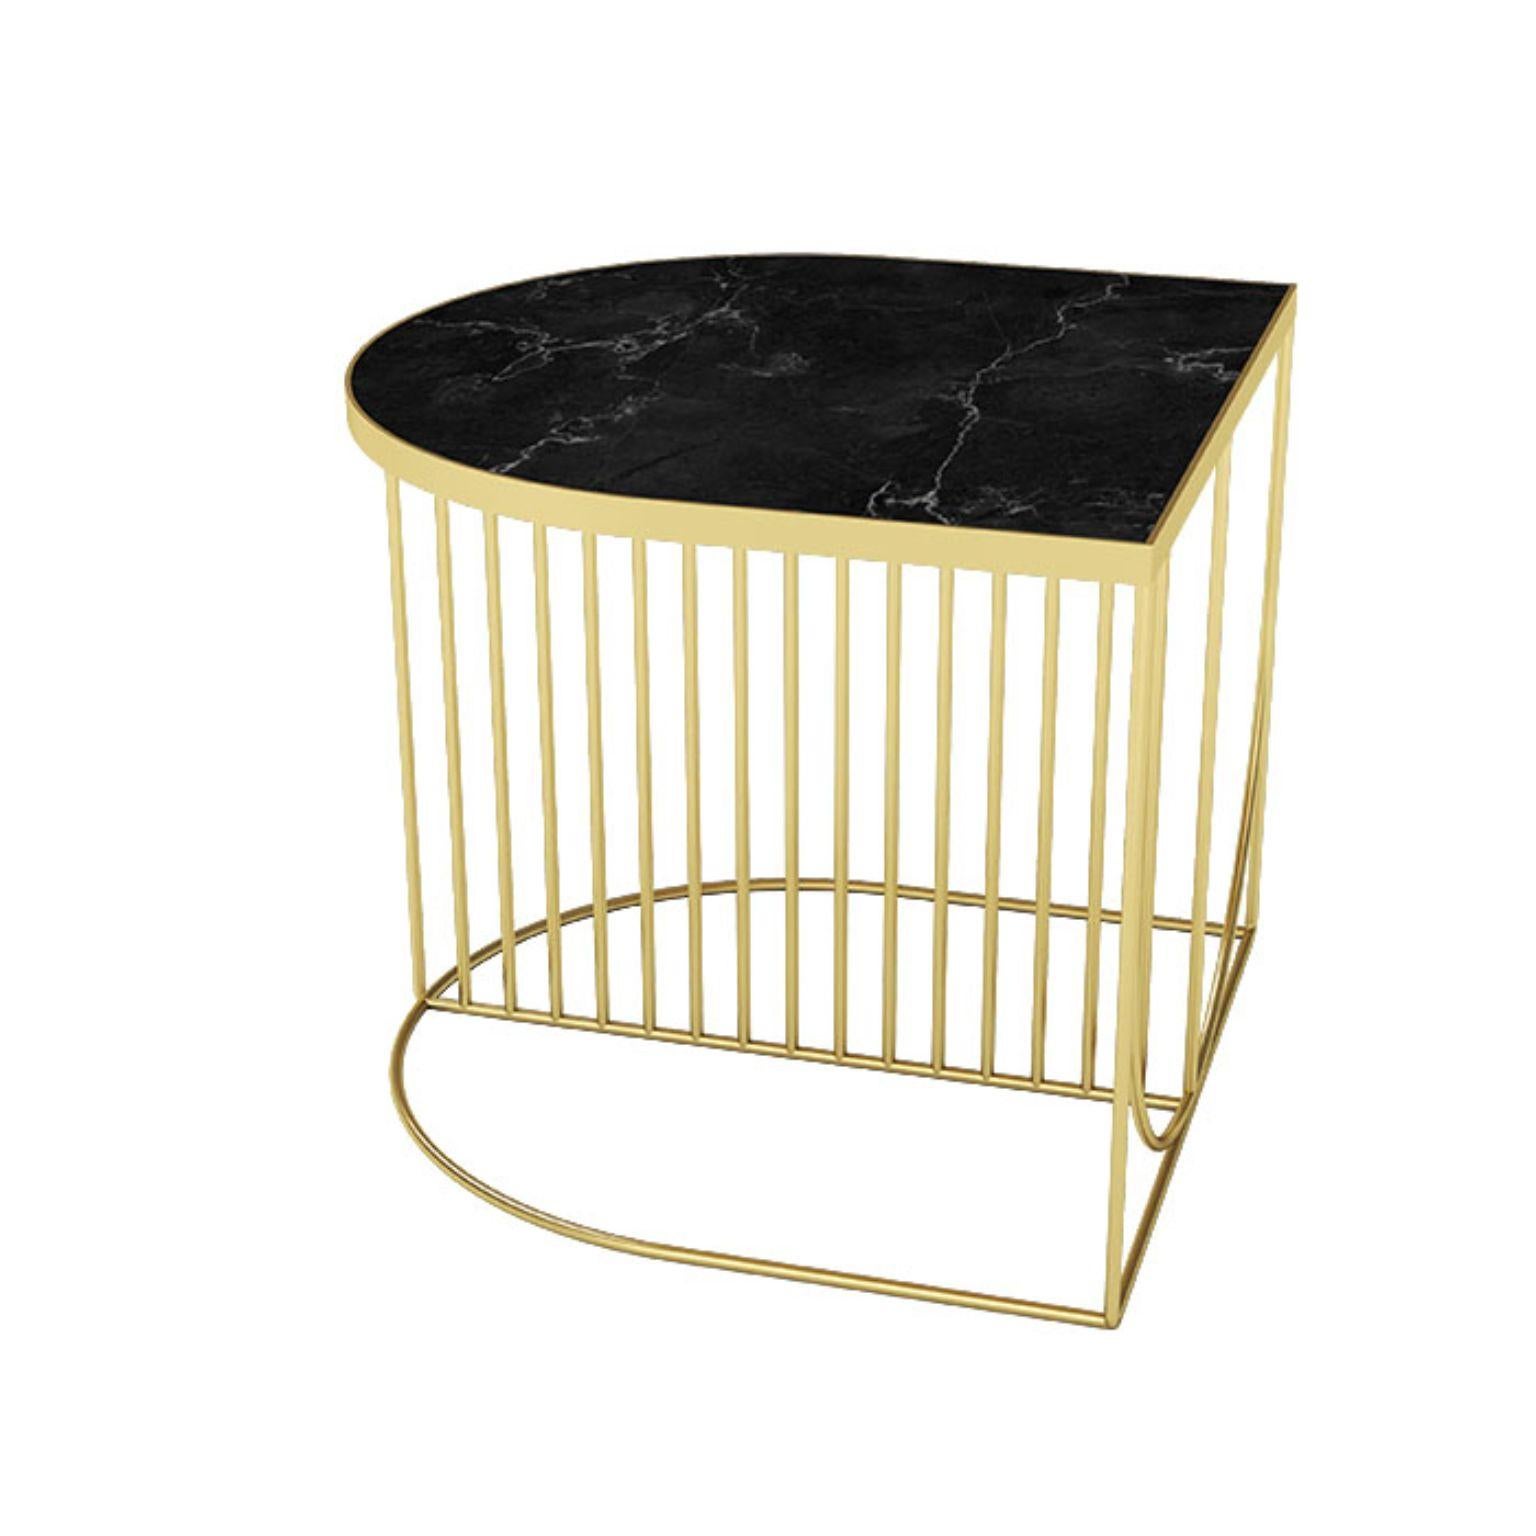 Black marble and gold steel contemporary side table
Dimensions: L 50 x W 50 x H 44.3 CM
Materials: Marble, steel 

This series consists of three different designs that you can combine in many different ways. The table tops come in two different